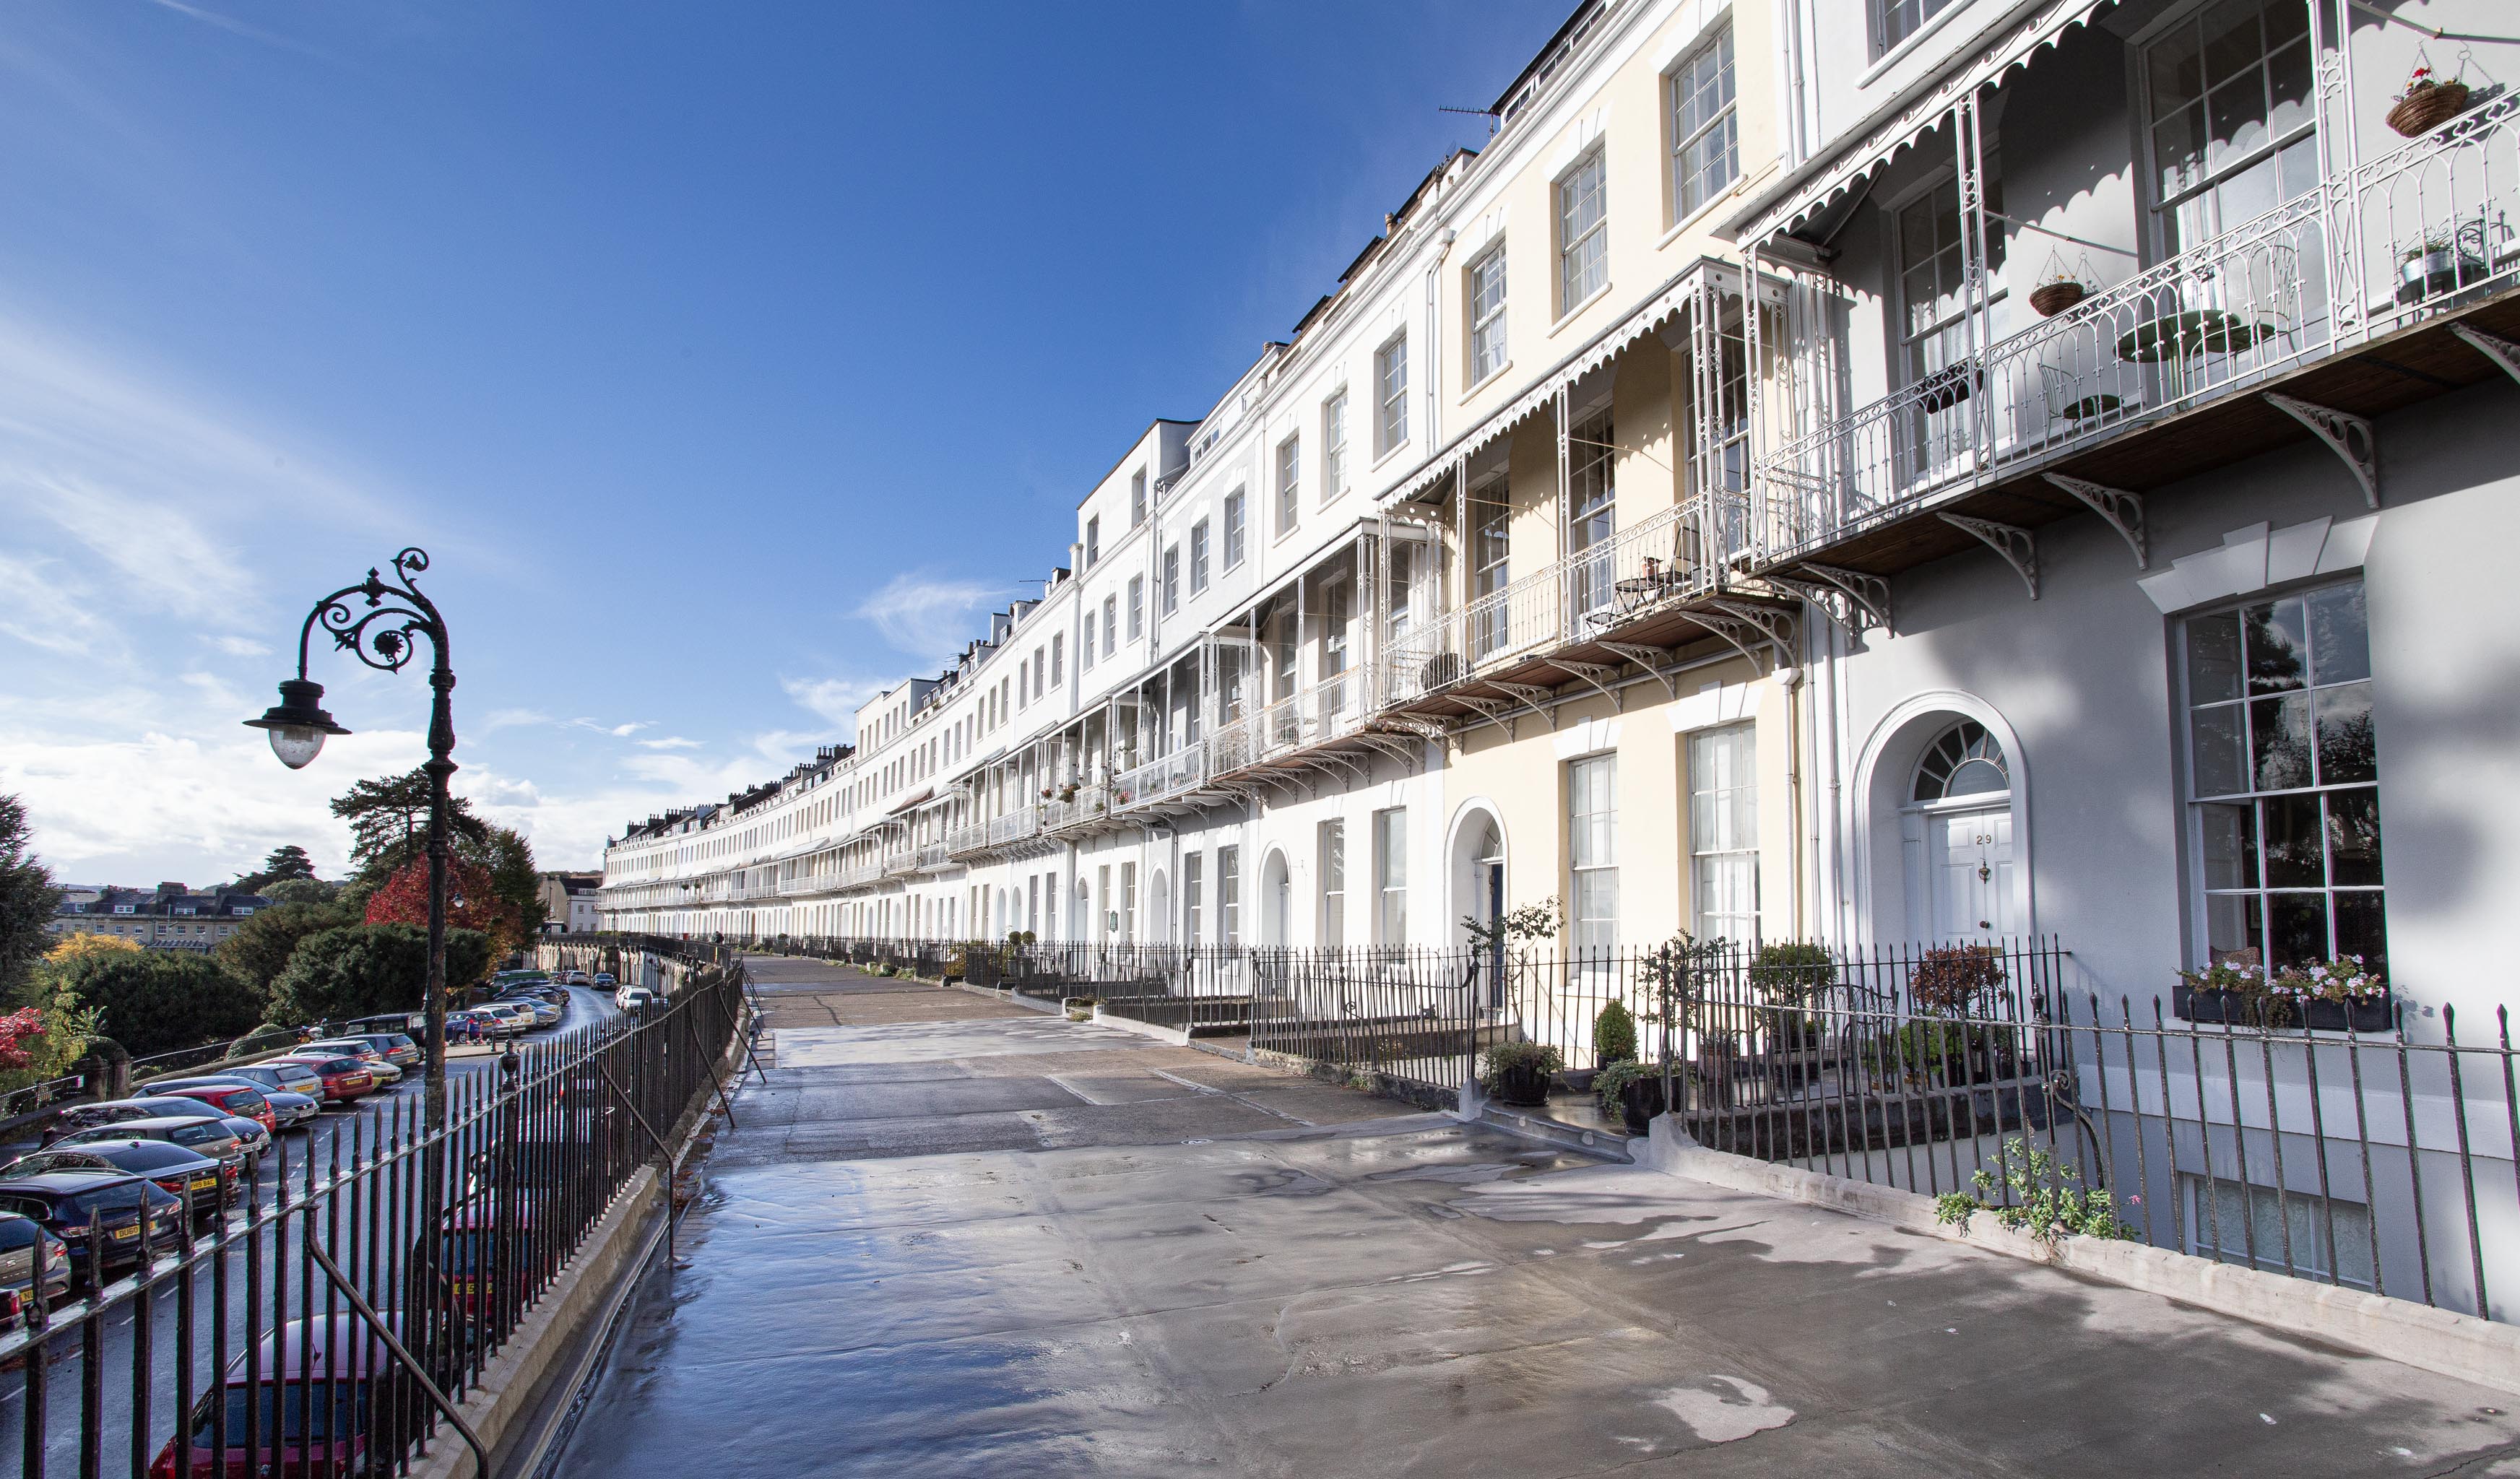 
                                Royal York Crescent

                                                                    Definitely one of the traditional wide-angle views of Clifton.

                                                                